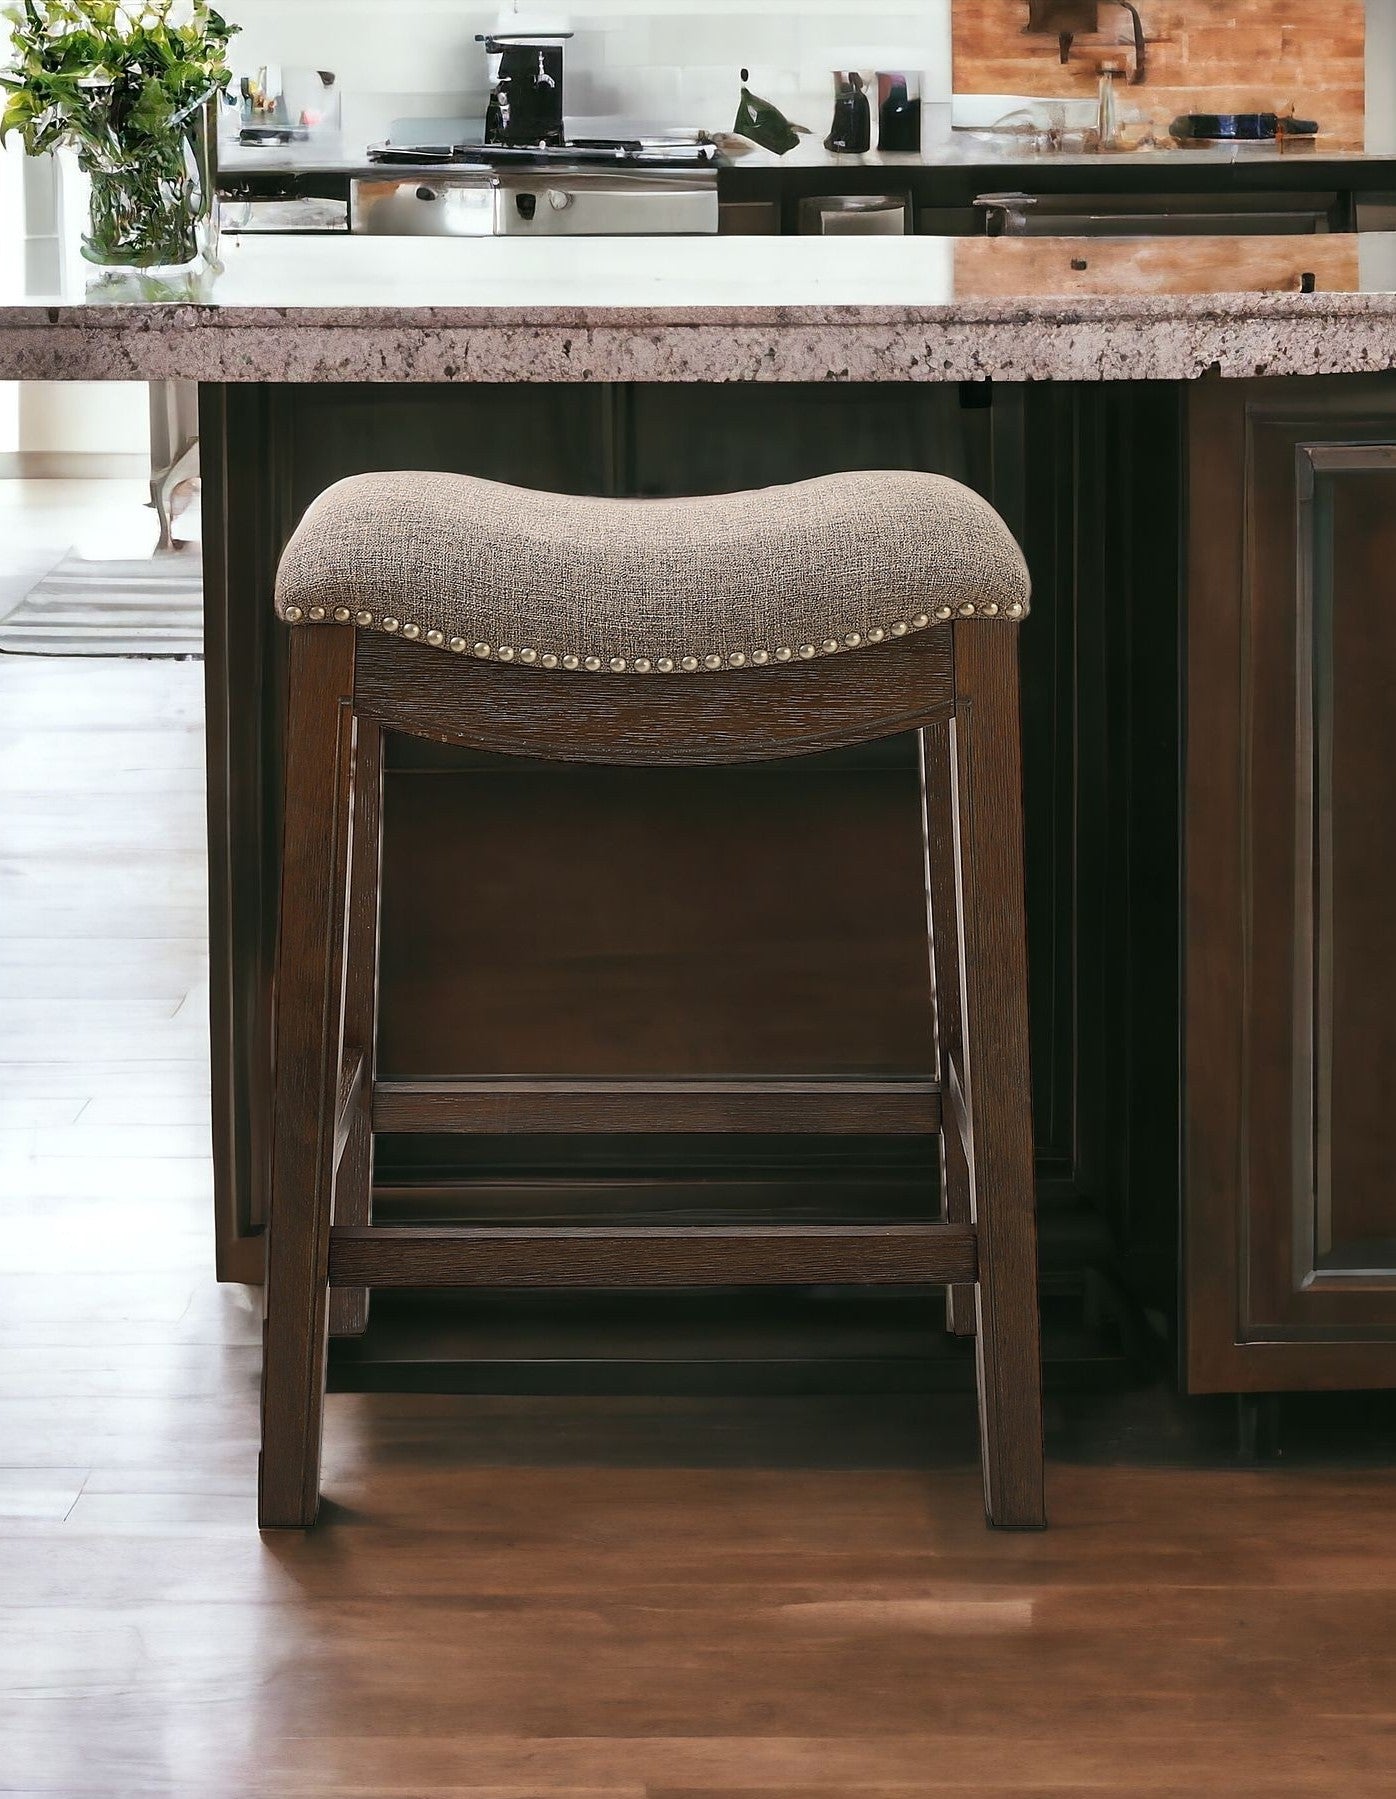 26" Taupe And Wood Brown Solid Wood Backless Counter Height Bar Chair